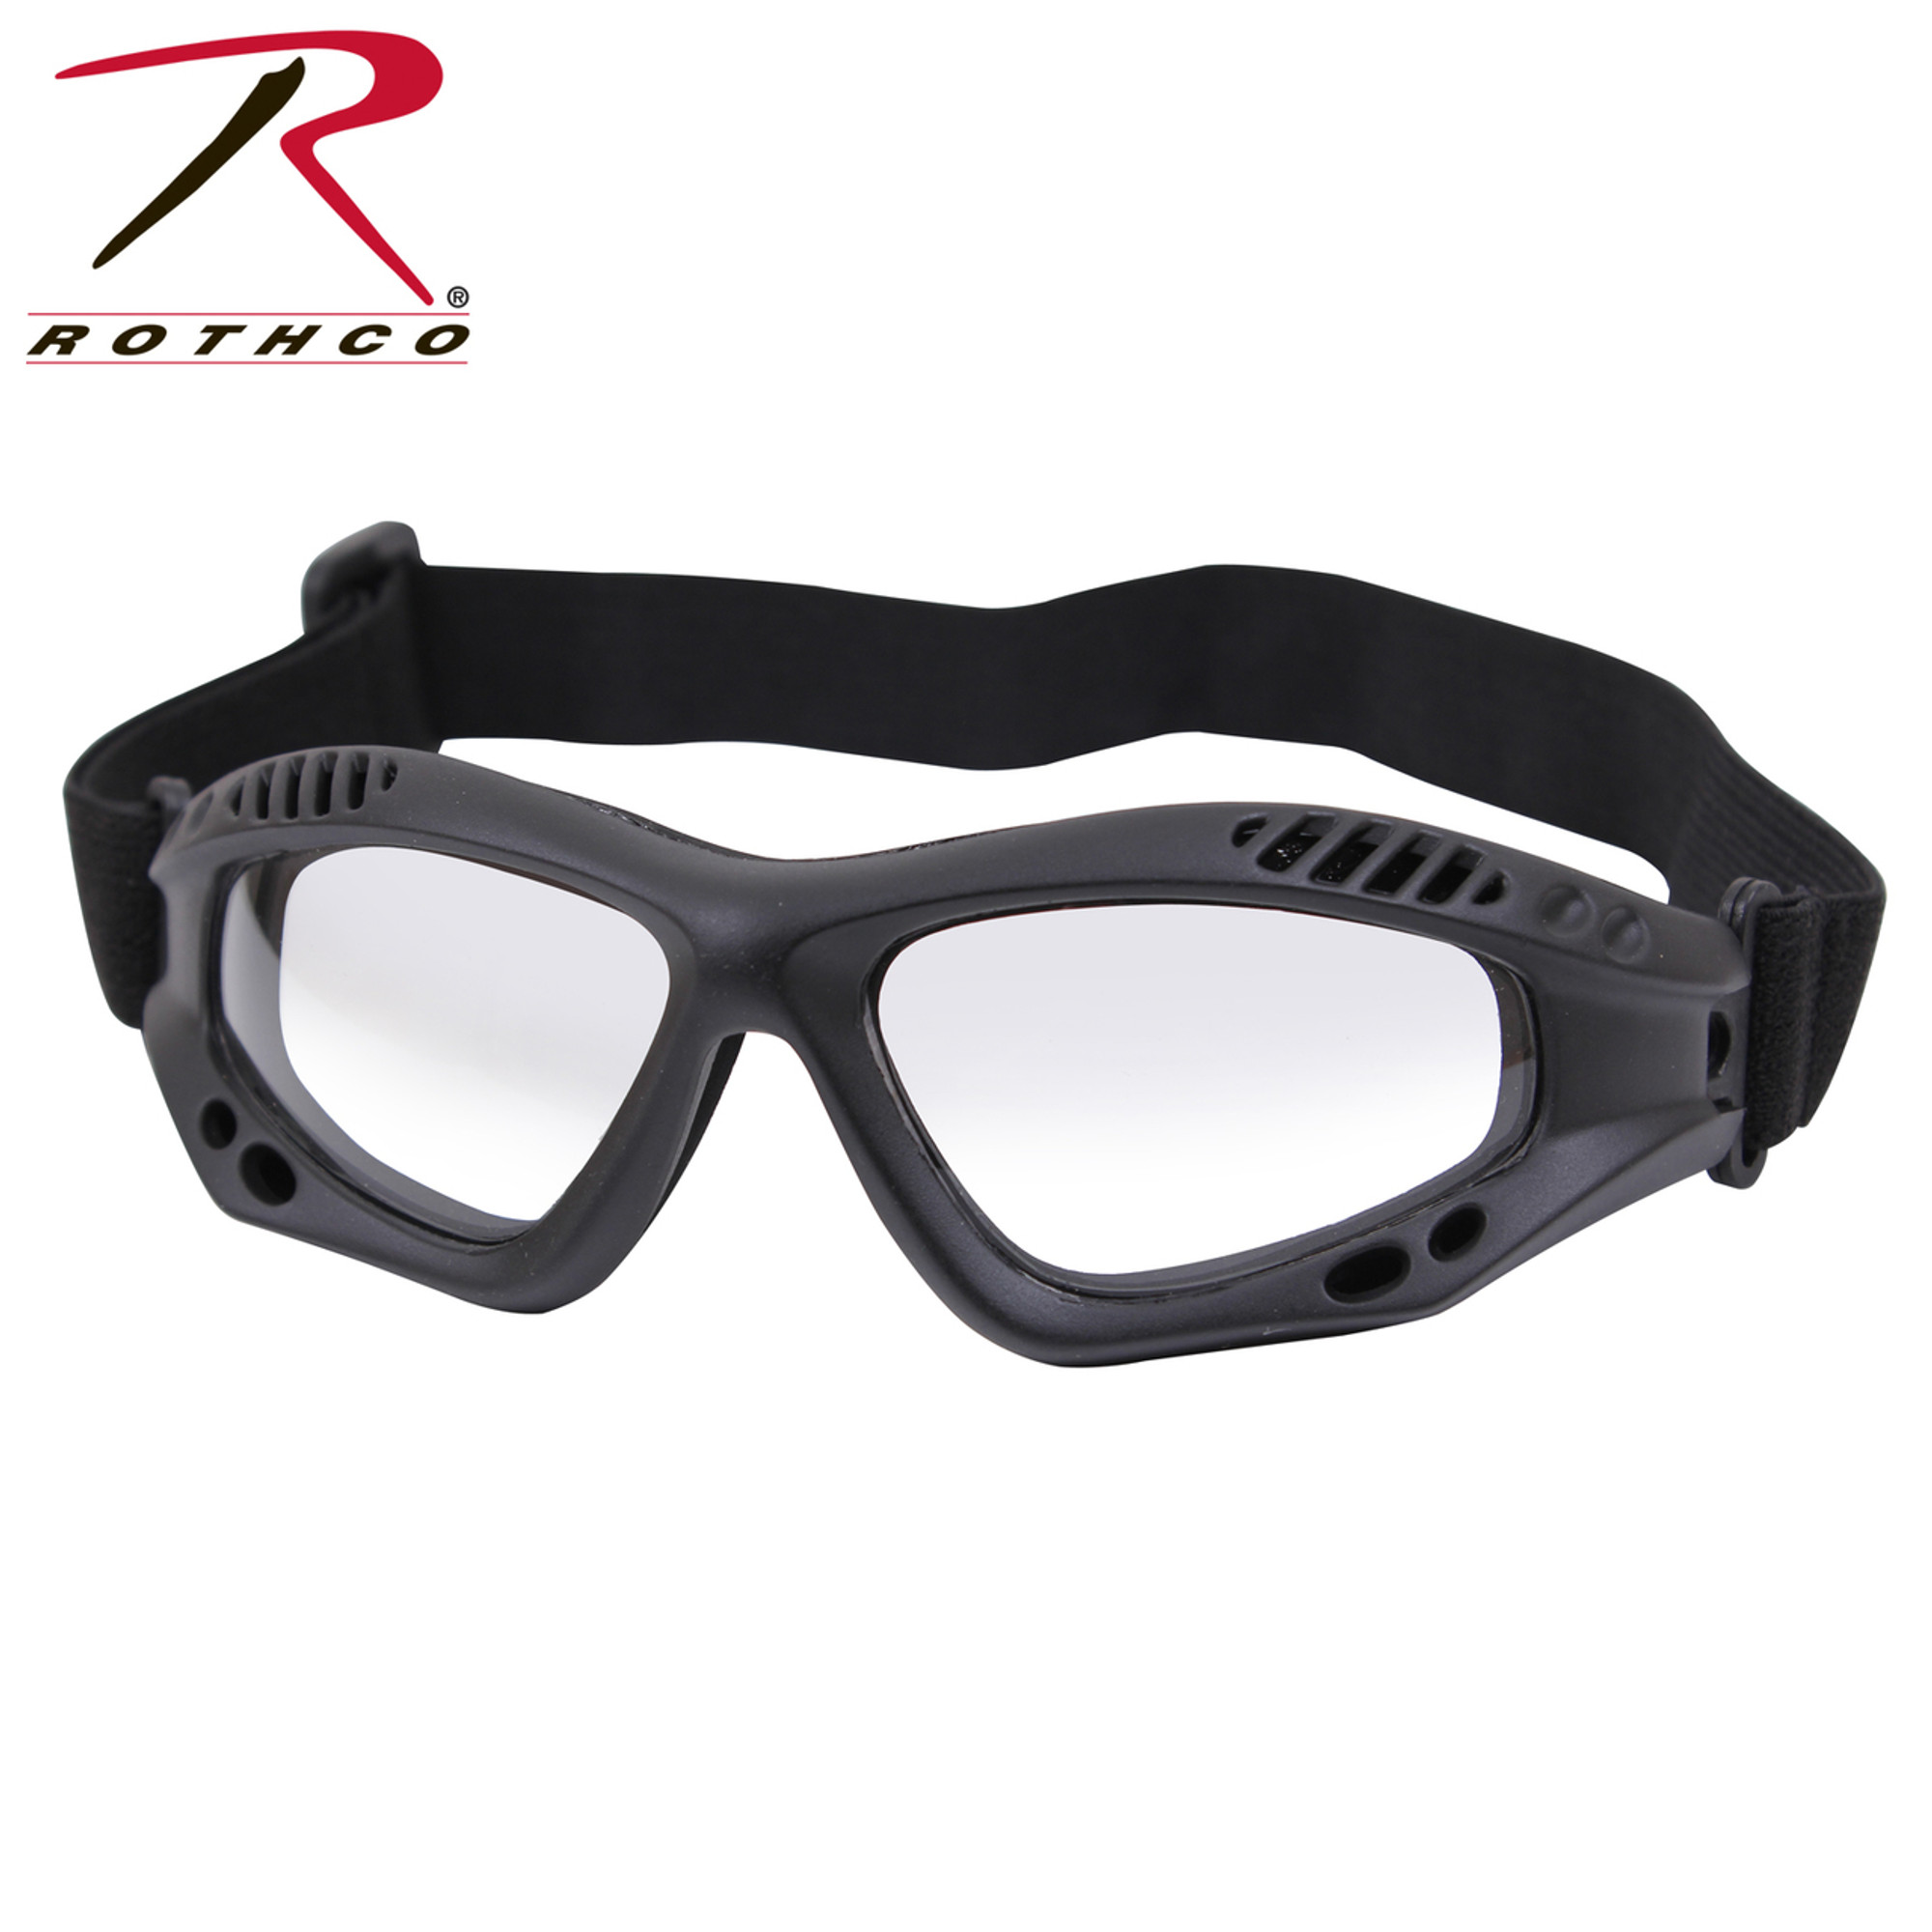 Rothco ANSI Rated Tactical Goggles - Black/Clear